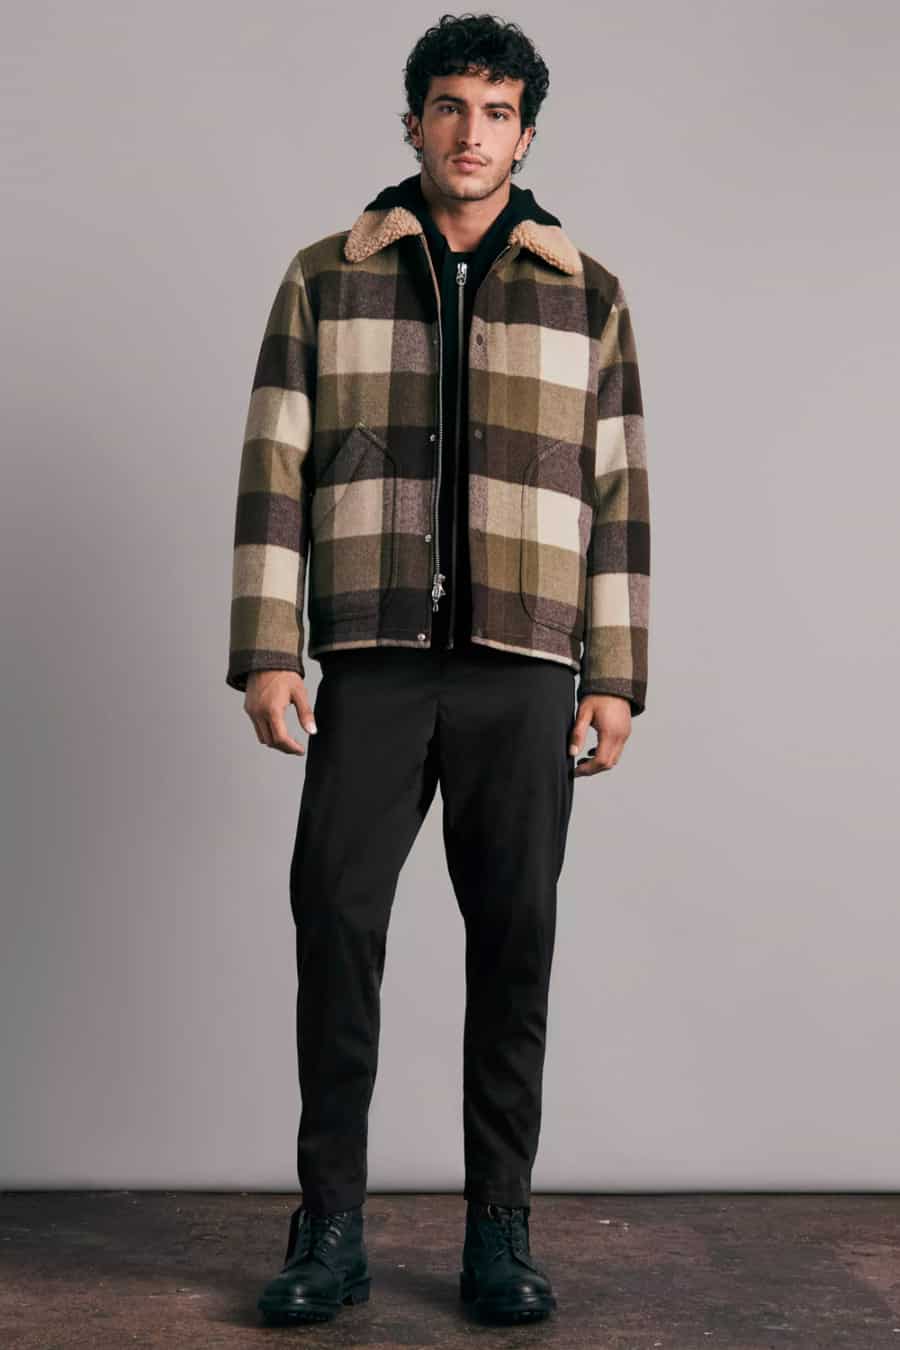 Men's black chinos, black hoodie, checked wool sherpa jacket and black boots outfit